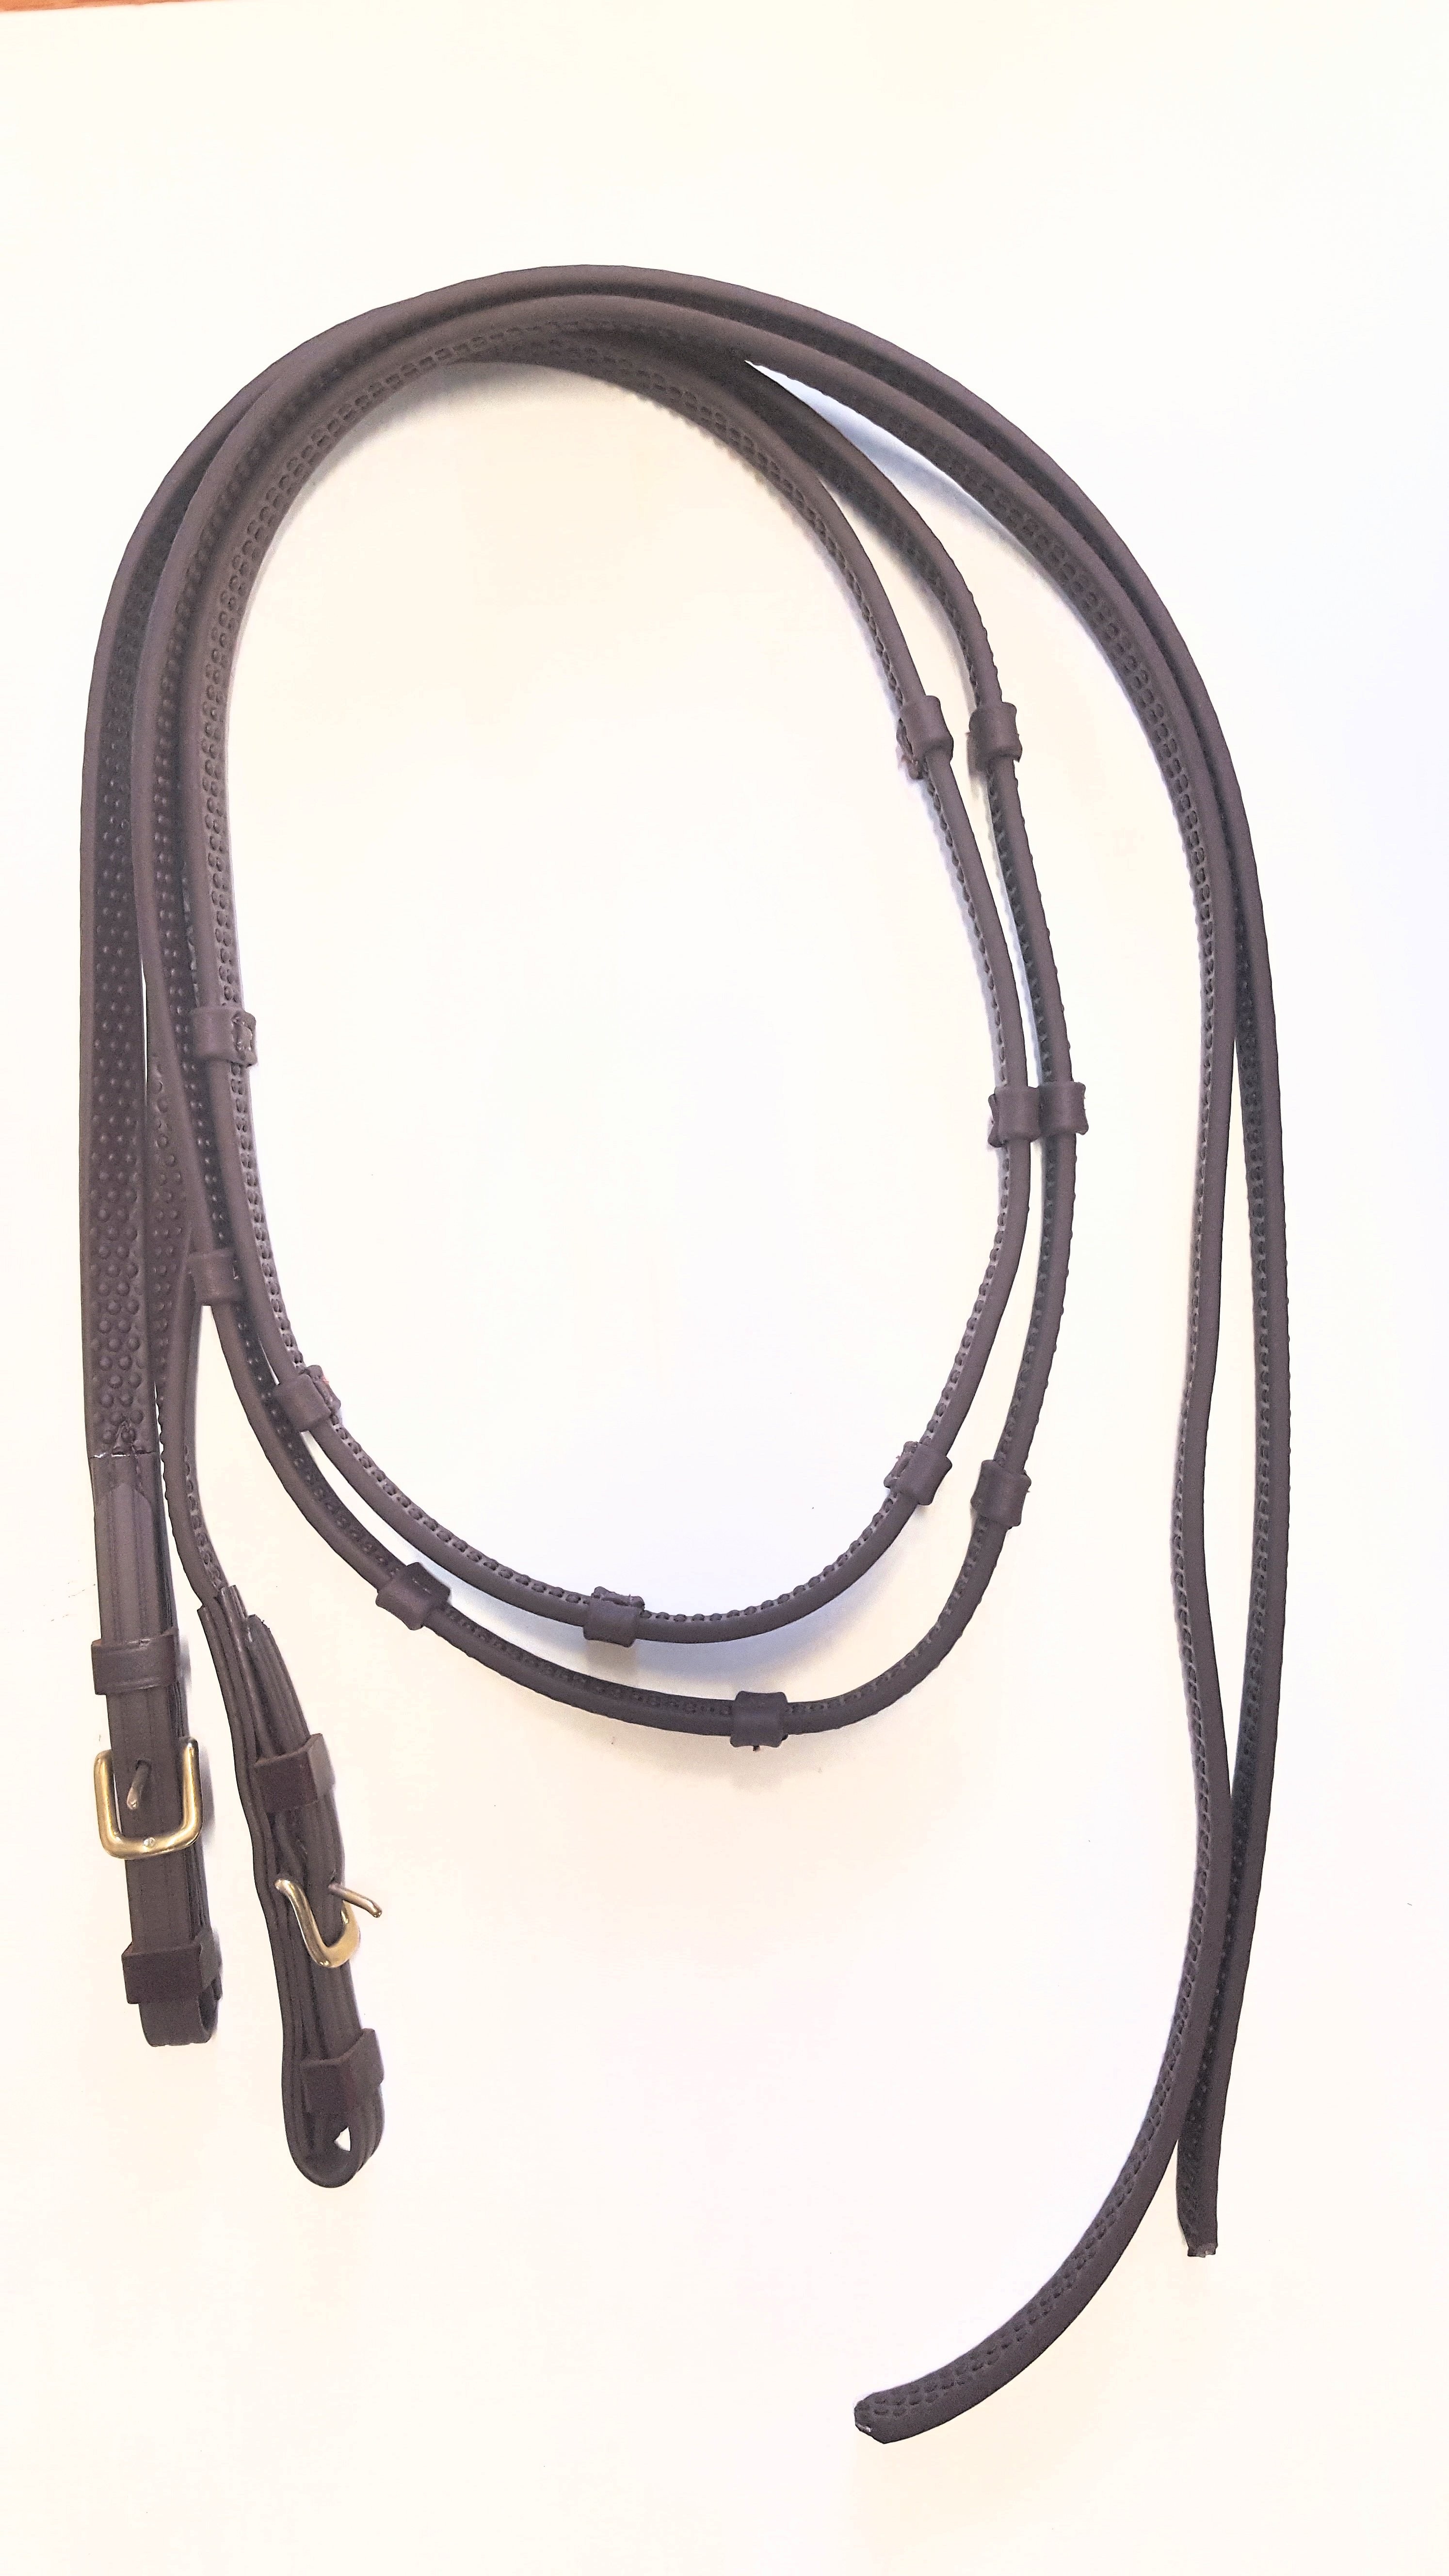 7' Split Super Grip Reins with Knobs Buckles or Snaps Martingale Stop option